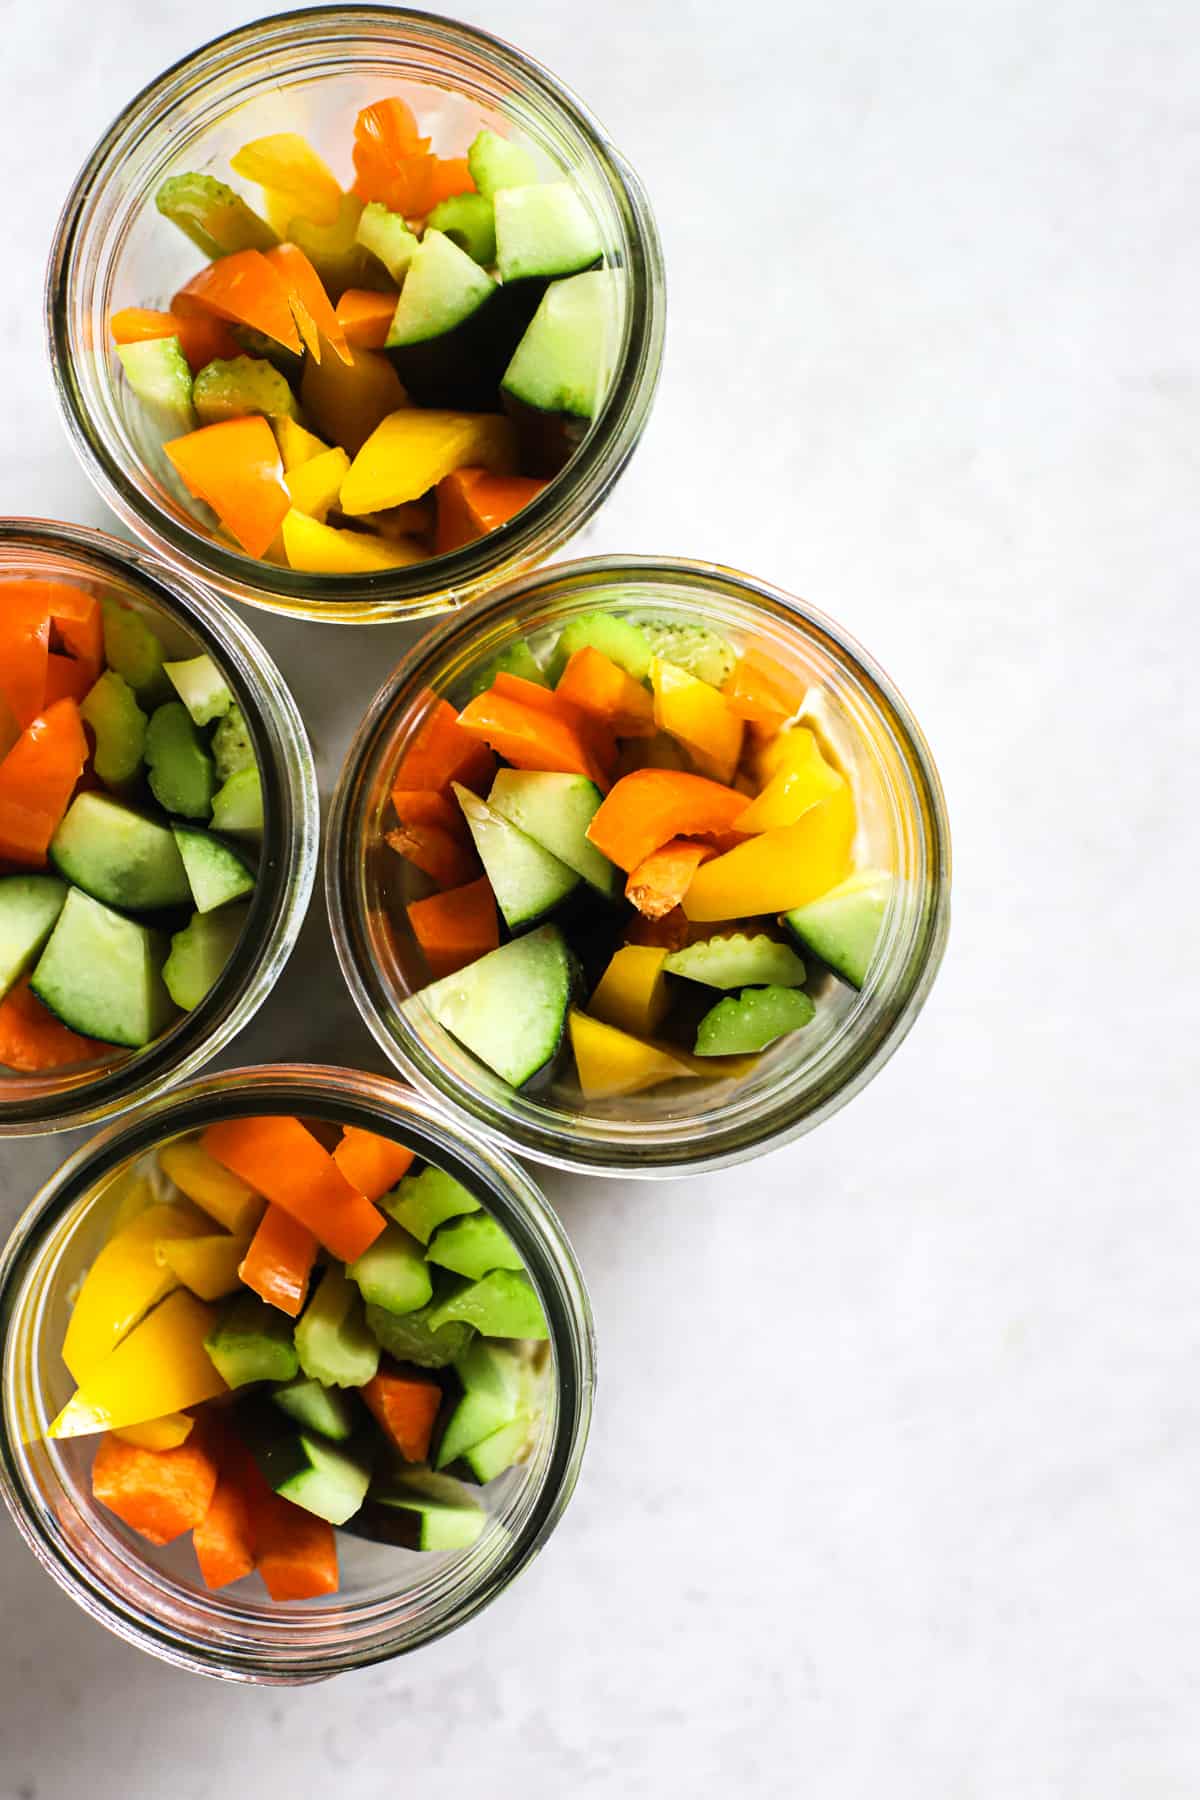 Four hummus and veggie jars on gray and white surface